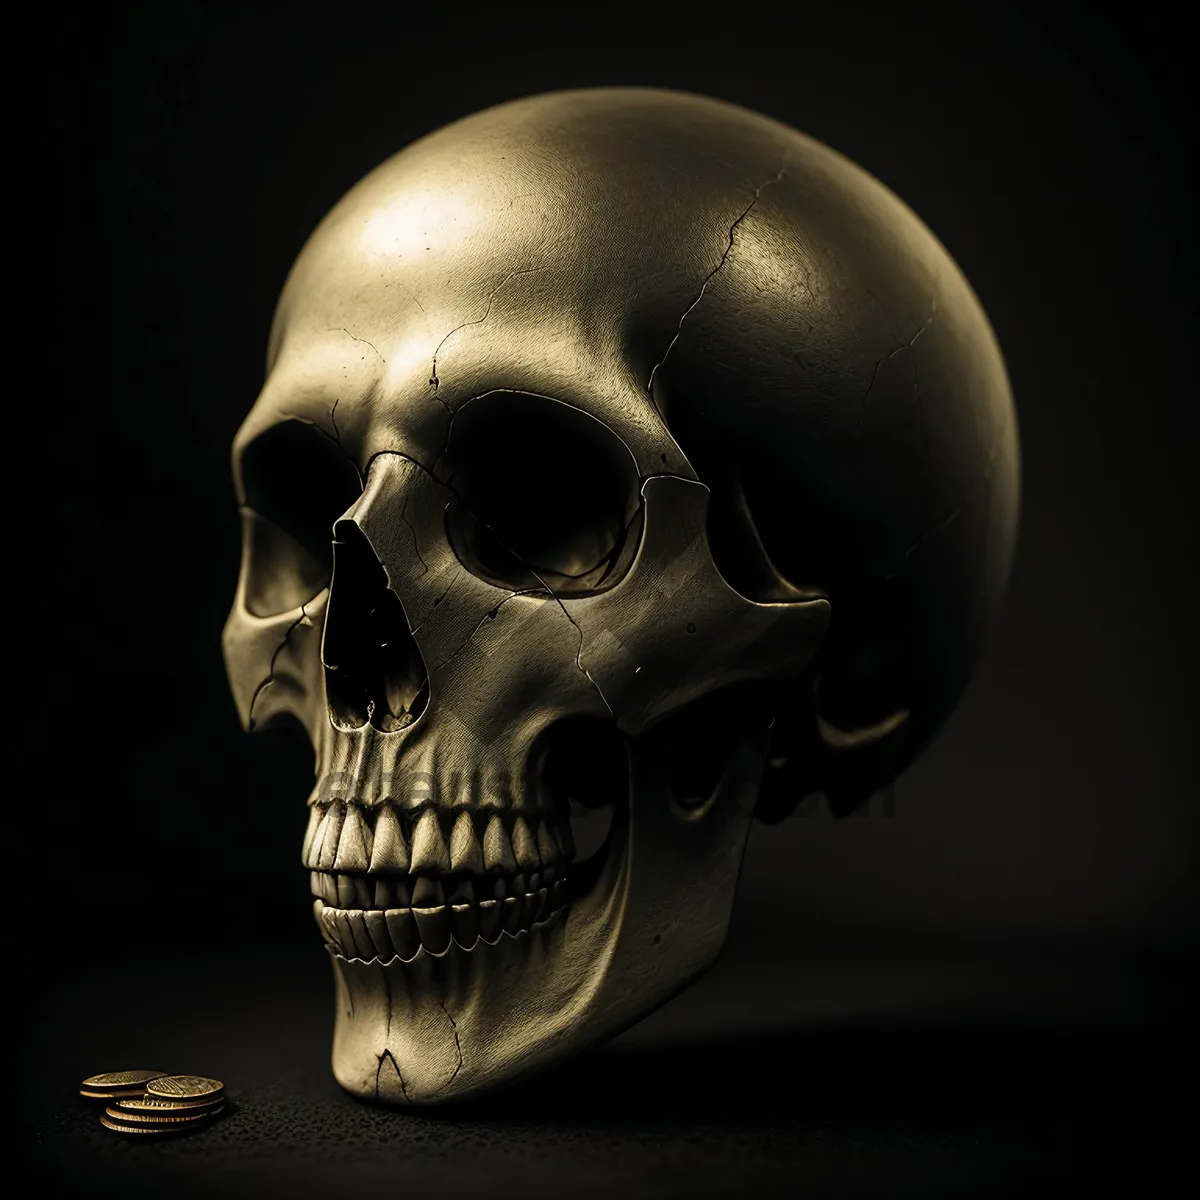 Picture of Skull-Faced Attire: Spooky Skeleton Death Mask